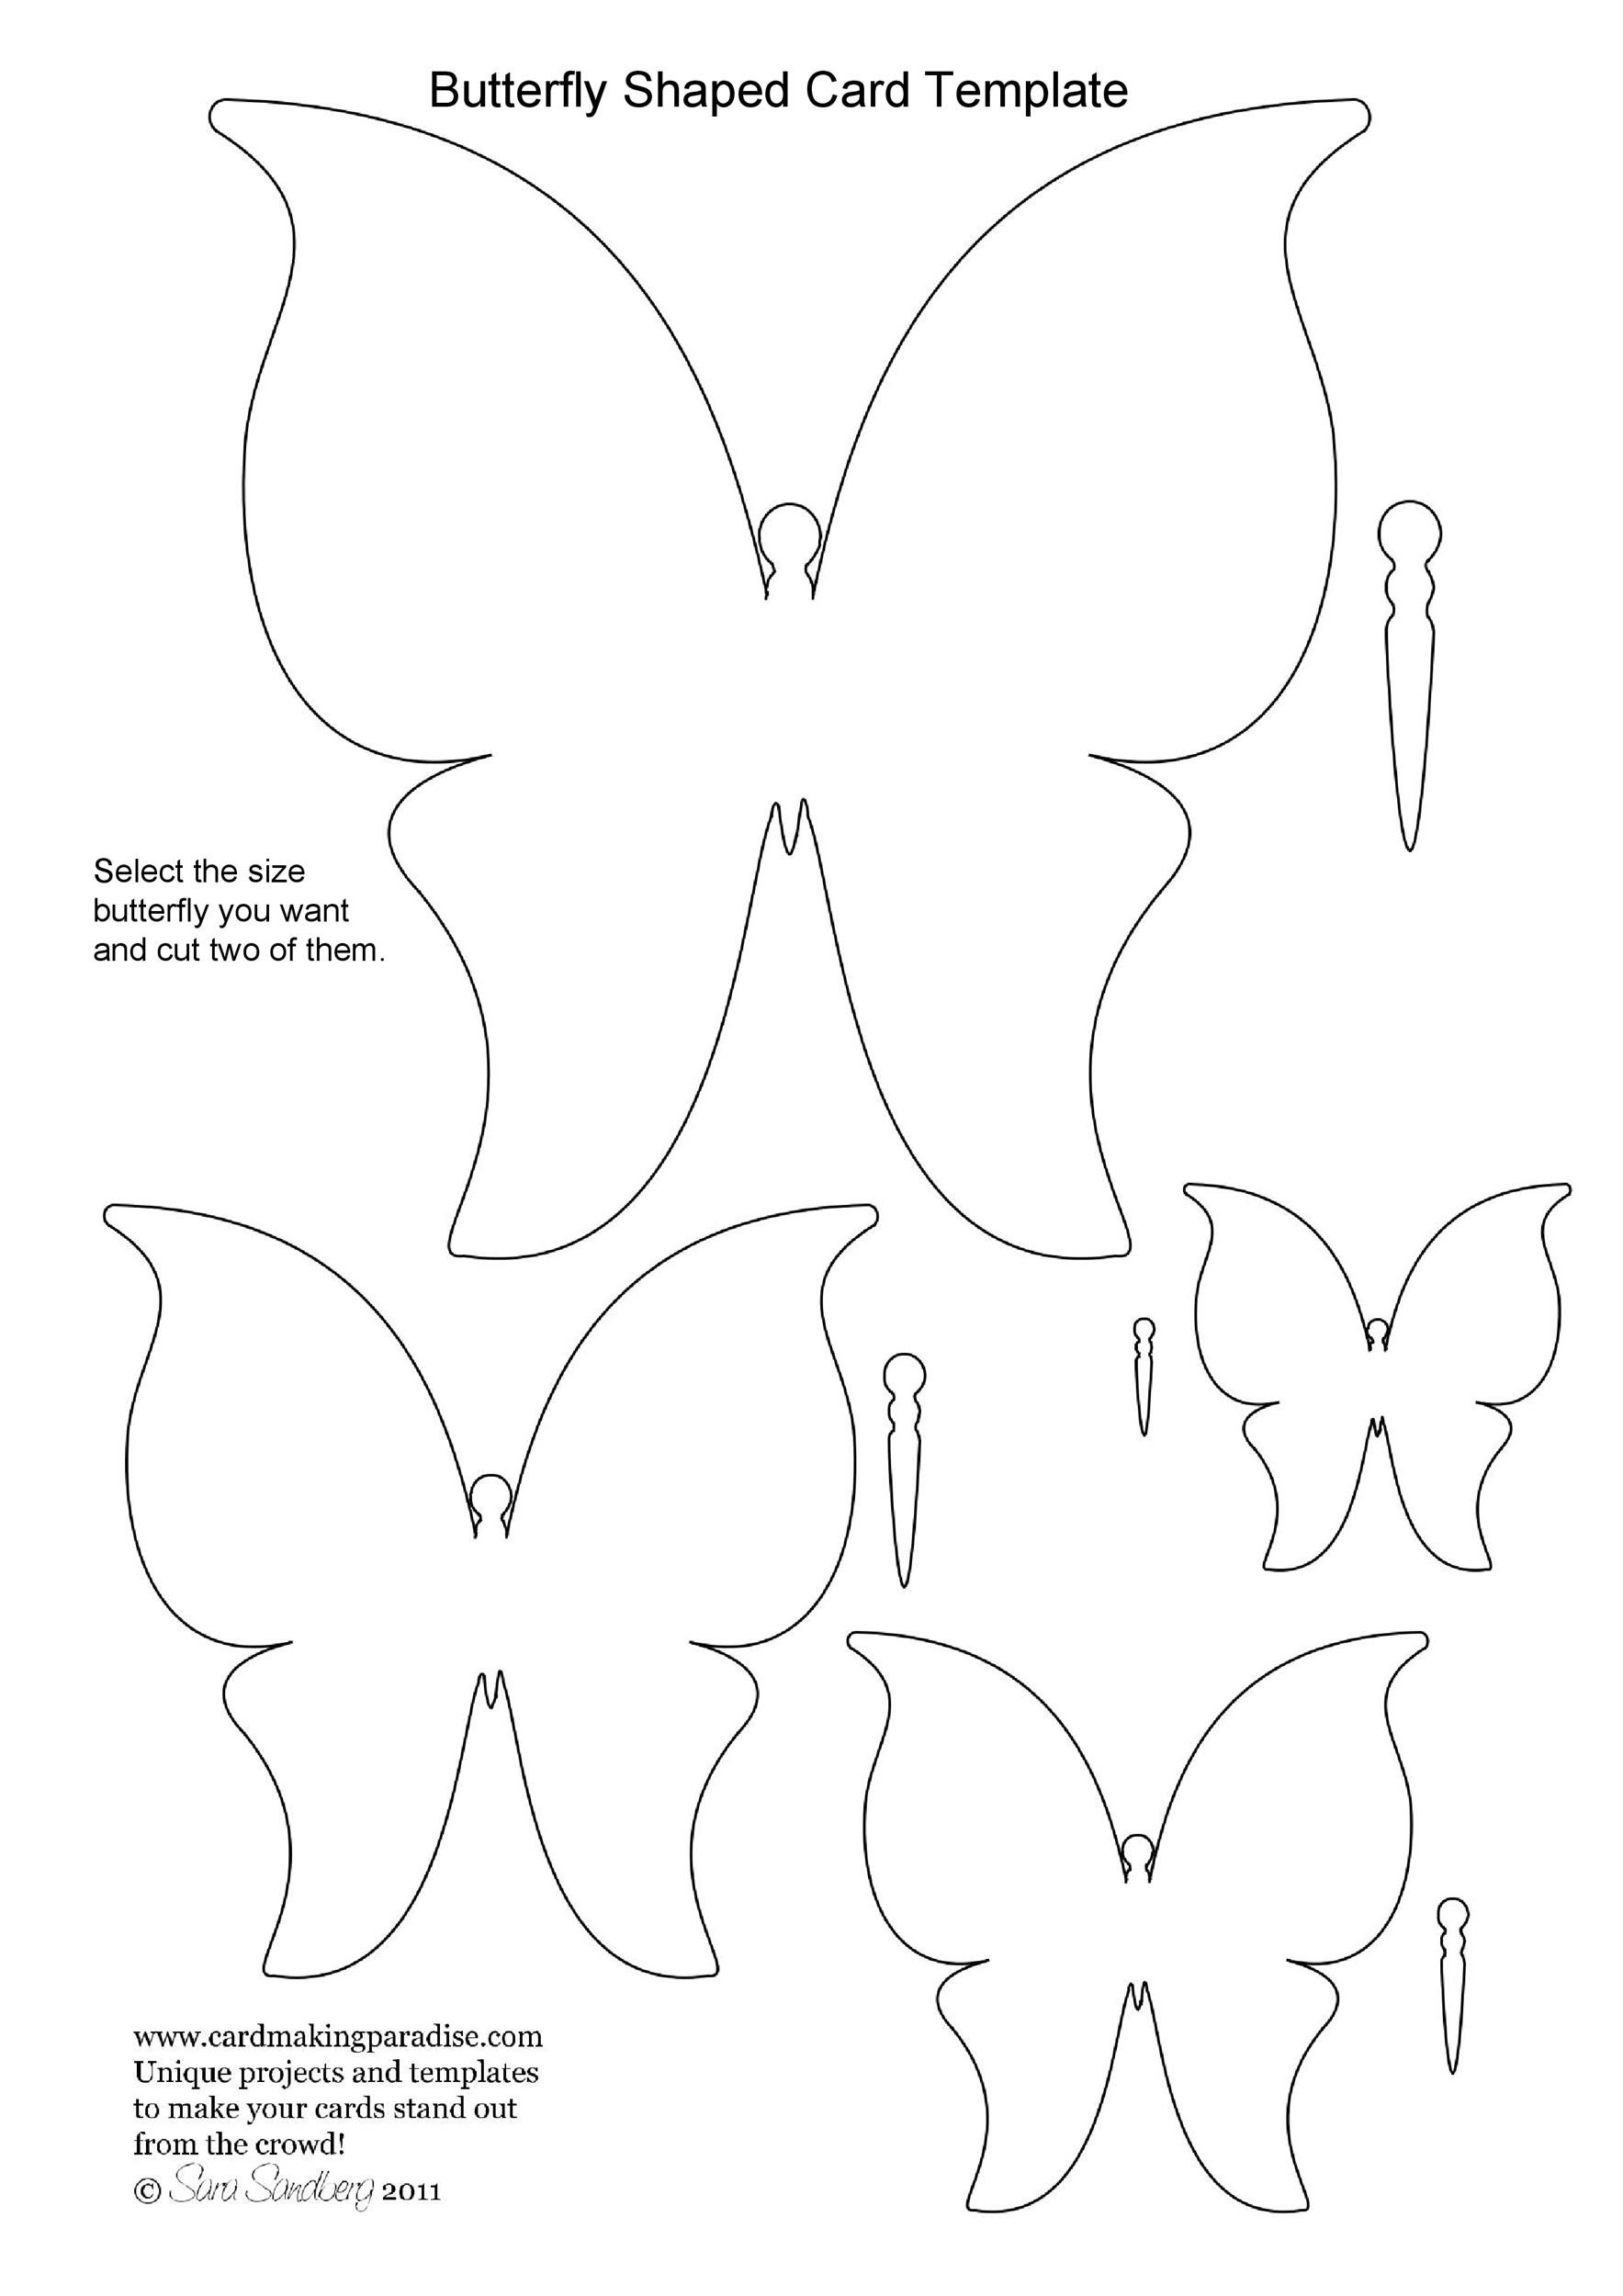 Printable & Cut Out Butterfly Templates